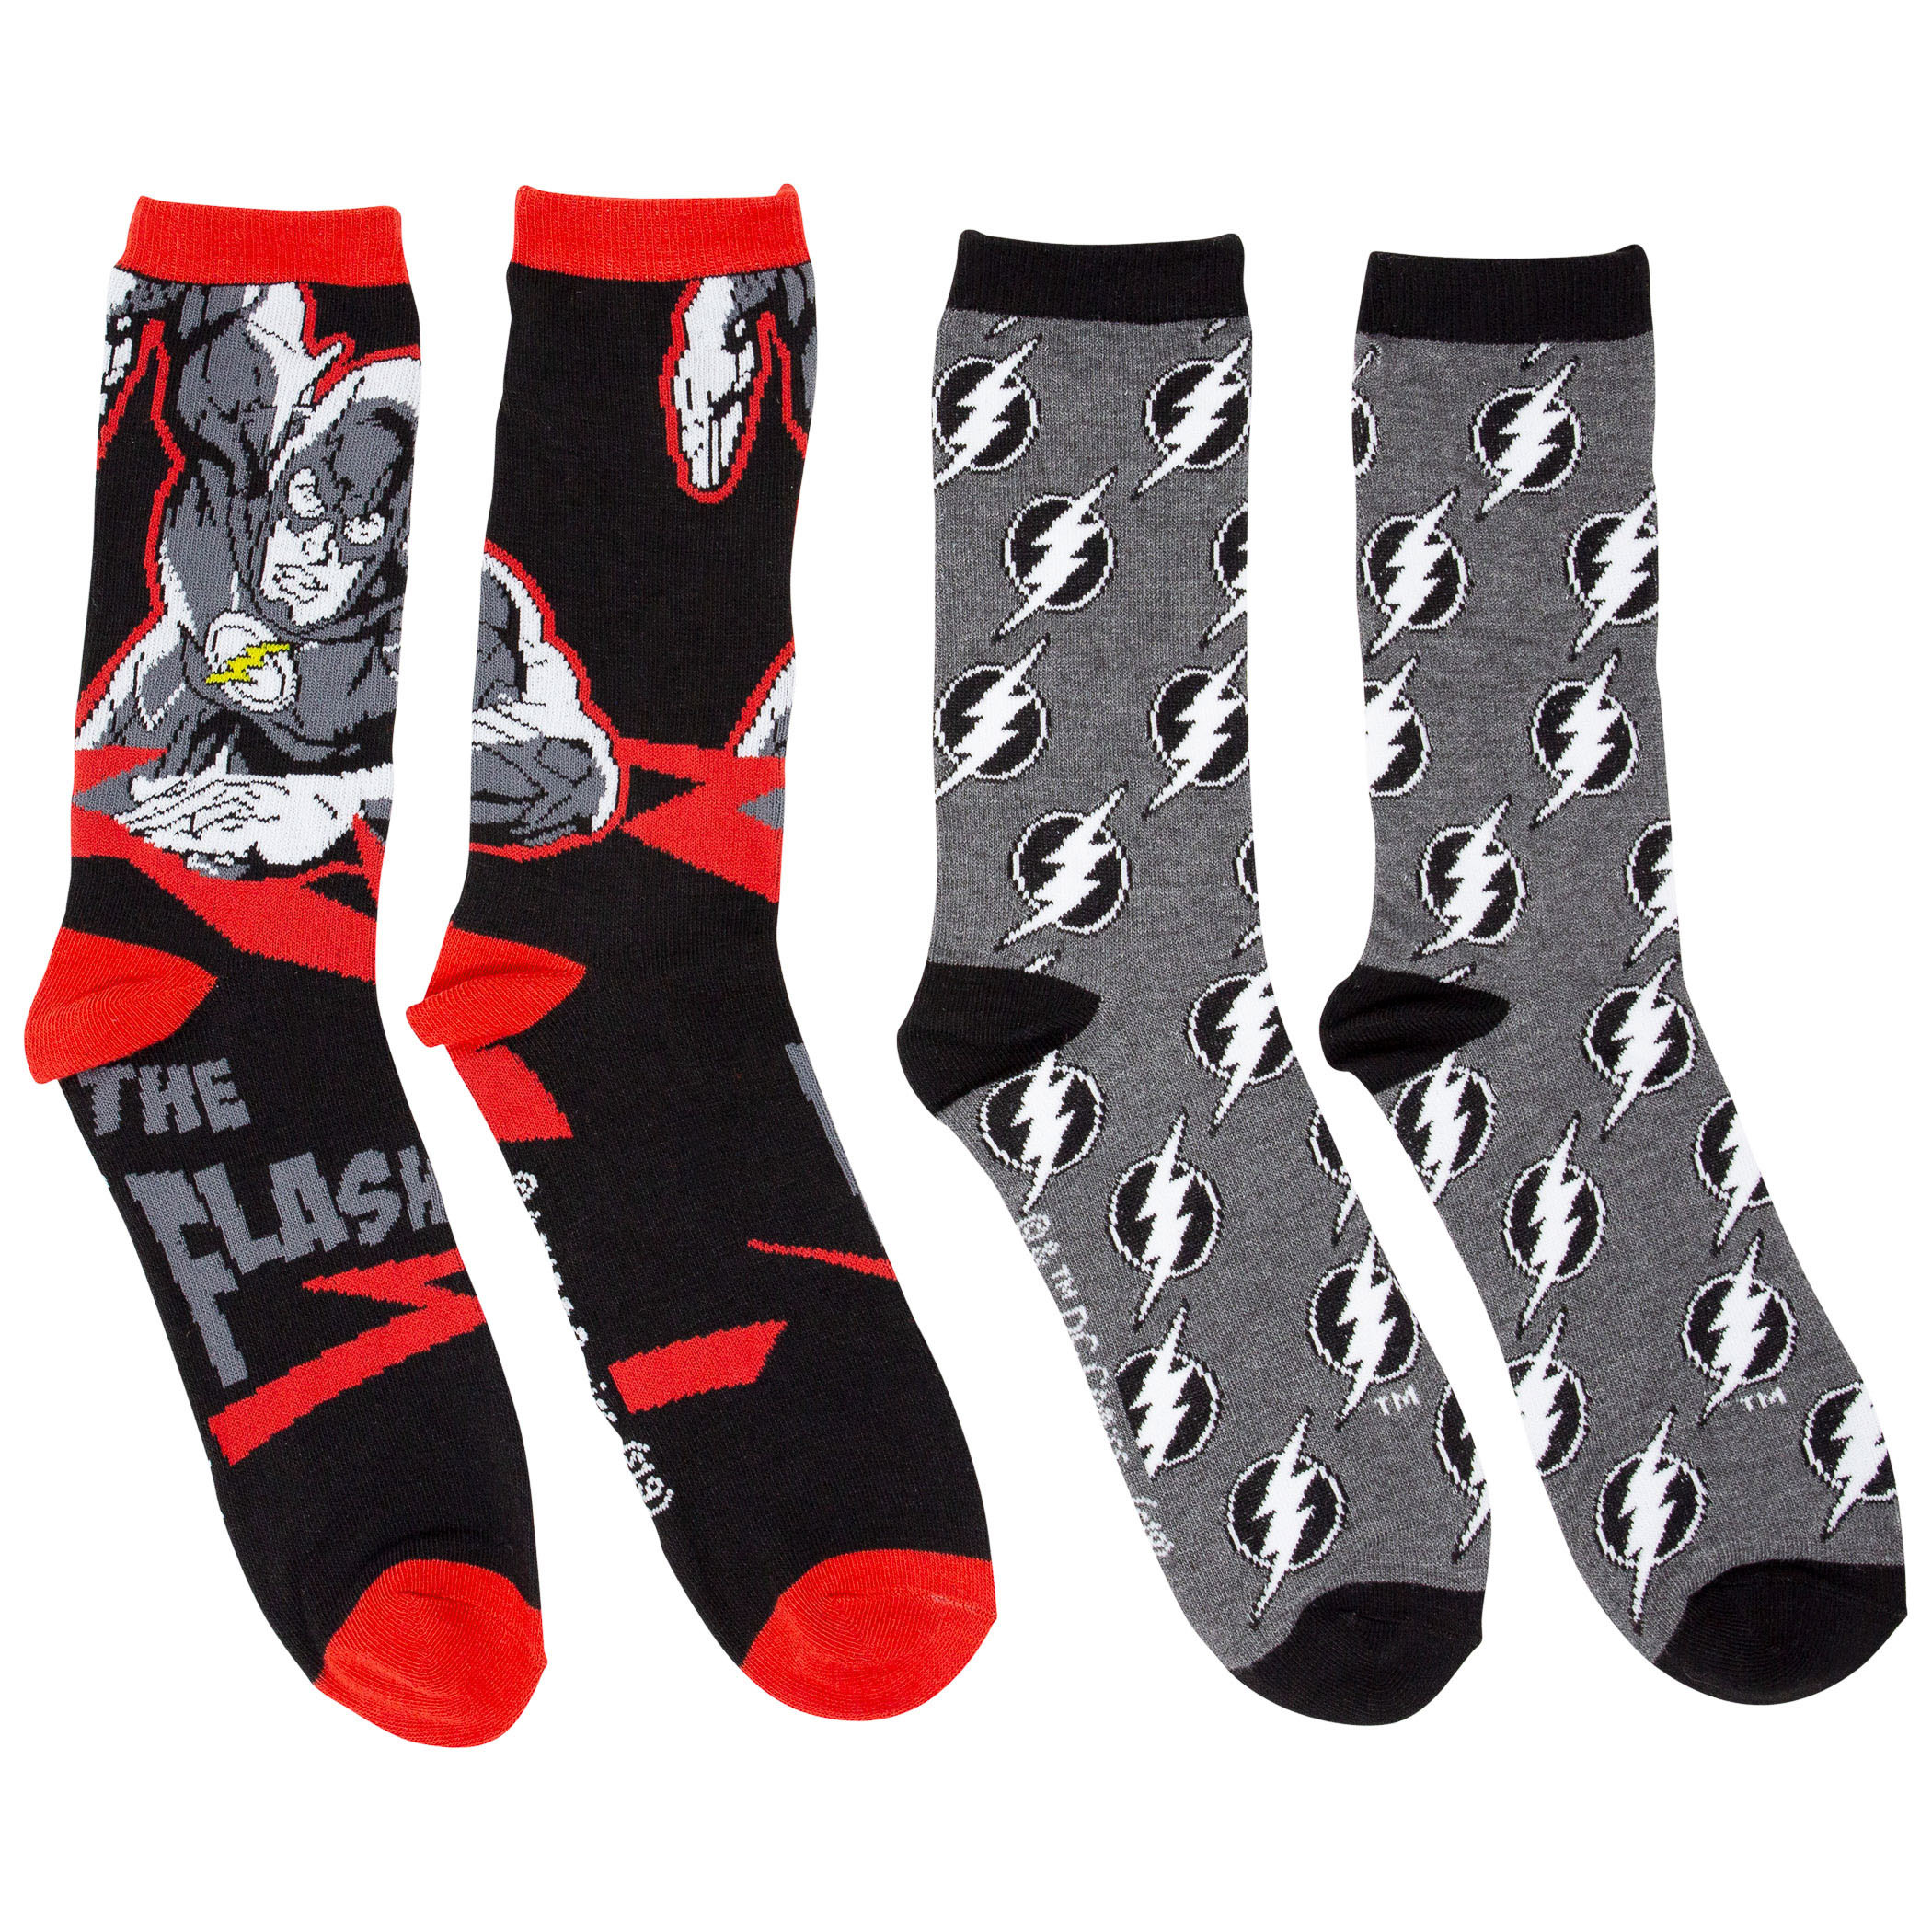 The Flash Greyed Out Symbols Crew Socks 2-Pack